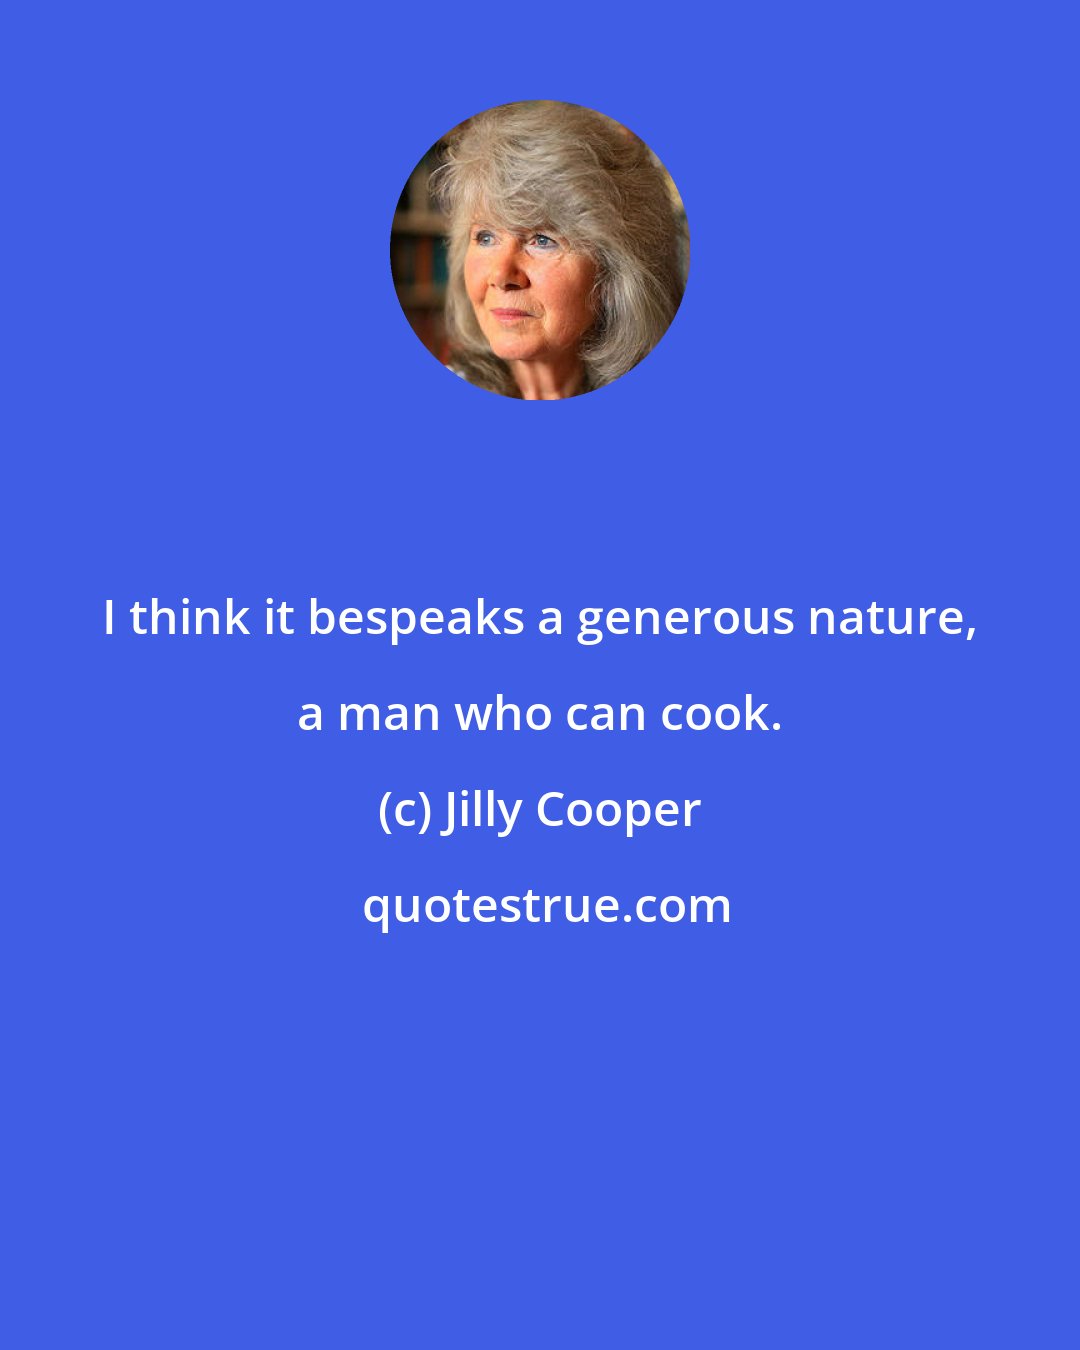 Jilly Cooper: I think it bespeaks a generous nature, a man who can cook.